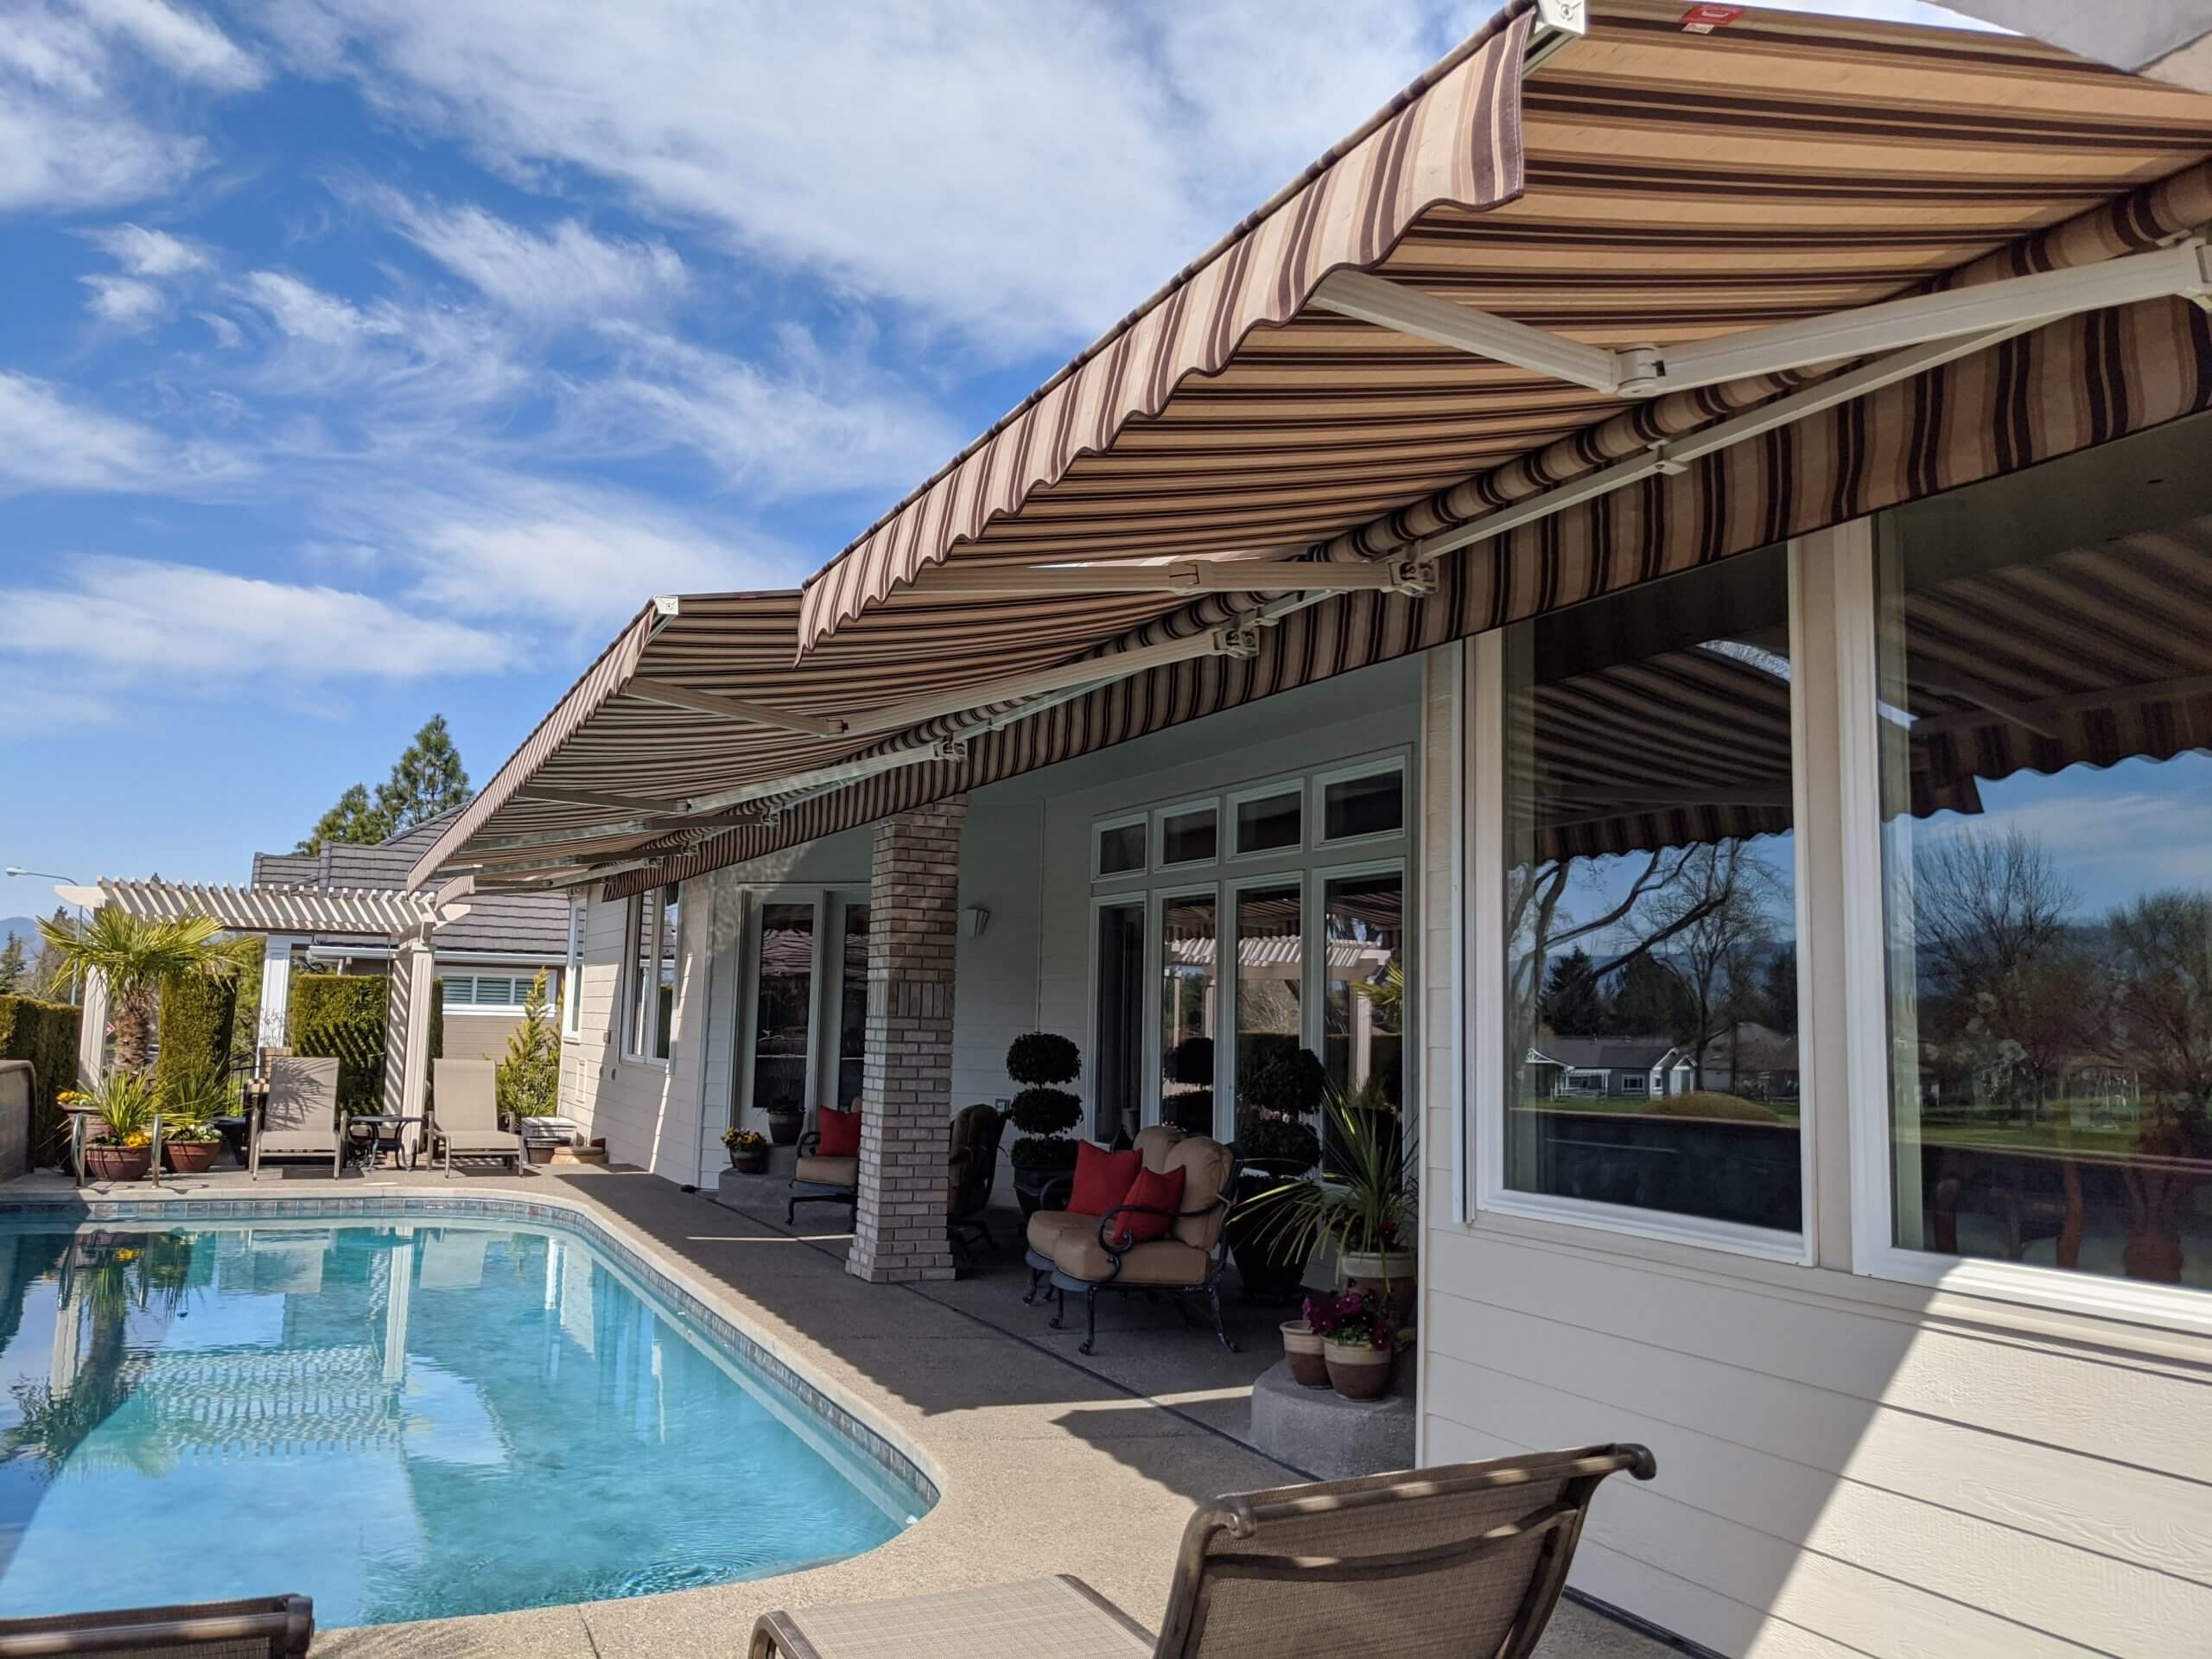 Adding A Retractable Awning To Your Home Is An Investment Your Entire